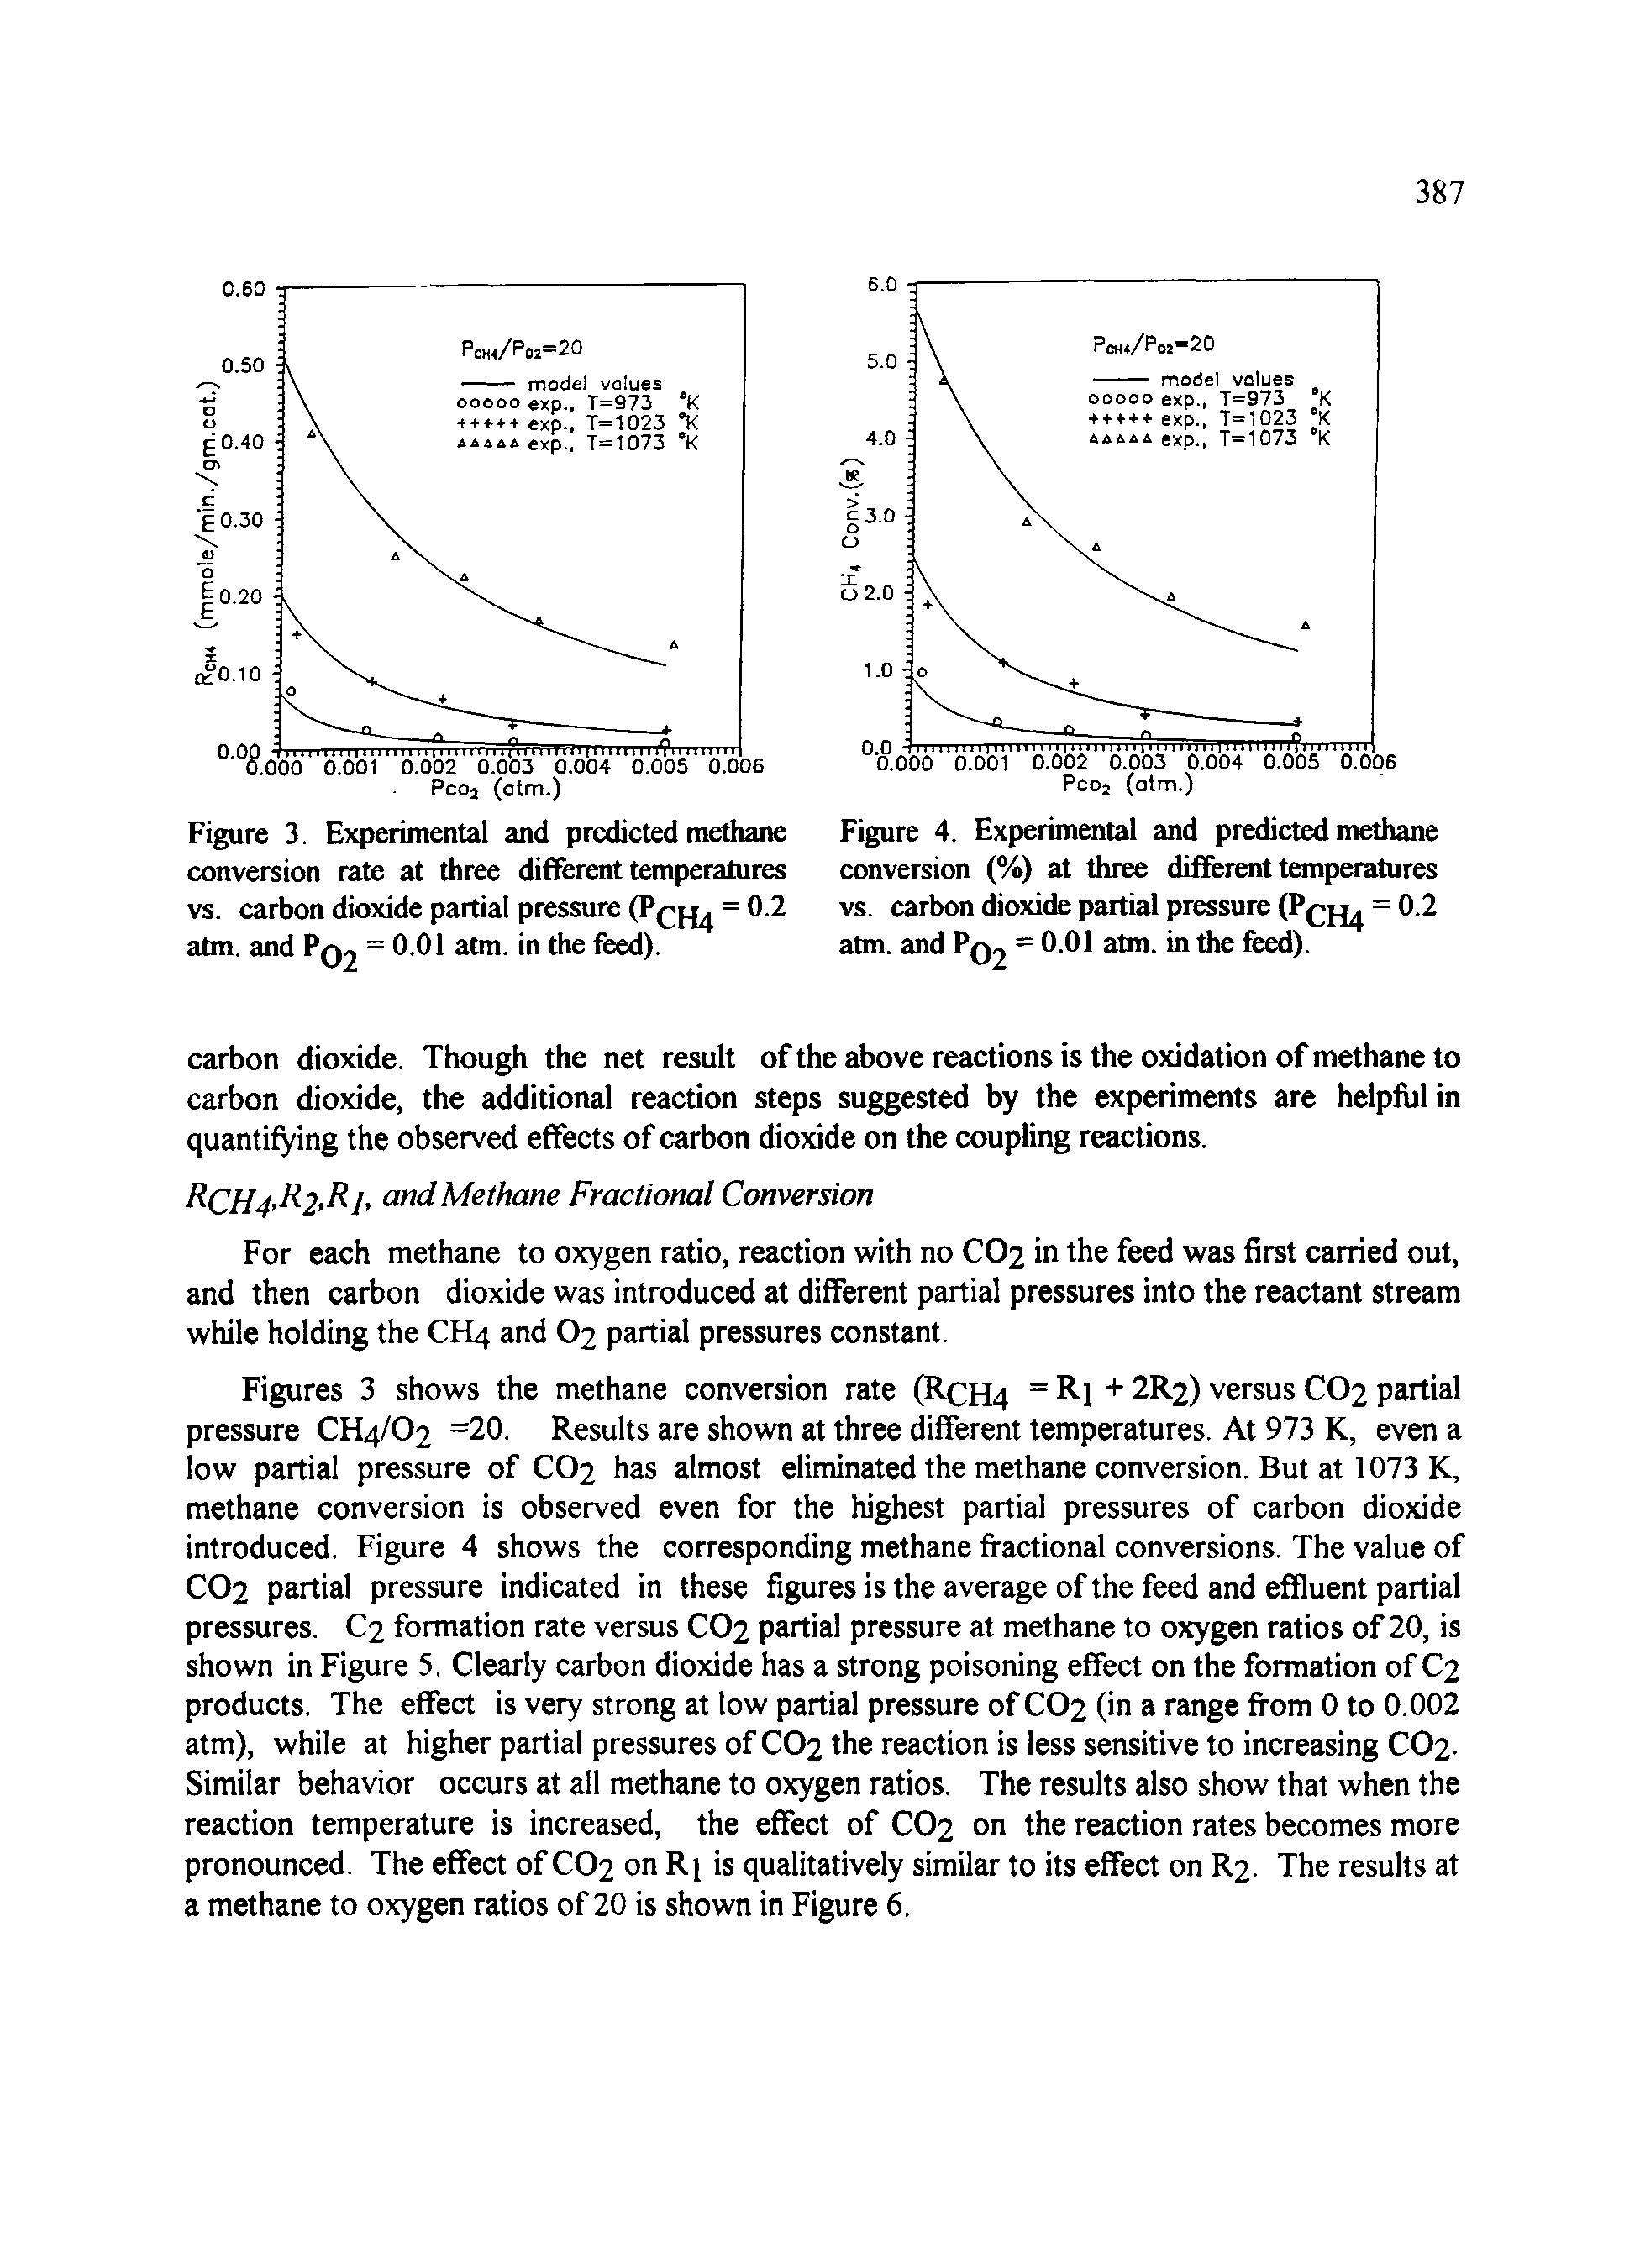 Figure 3. Experimental and predicted methane conversion rate at three different temperatures vs. carbon dioxide partial pressure (Pcf = 0.2 atm. and Pq2 = 0.01 atm. in the feed).